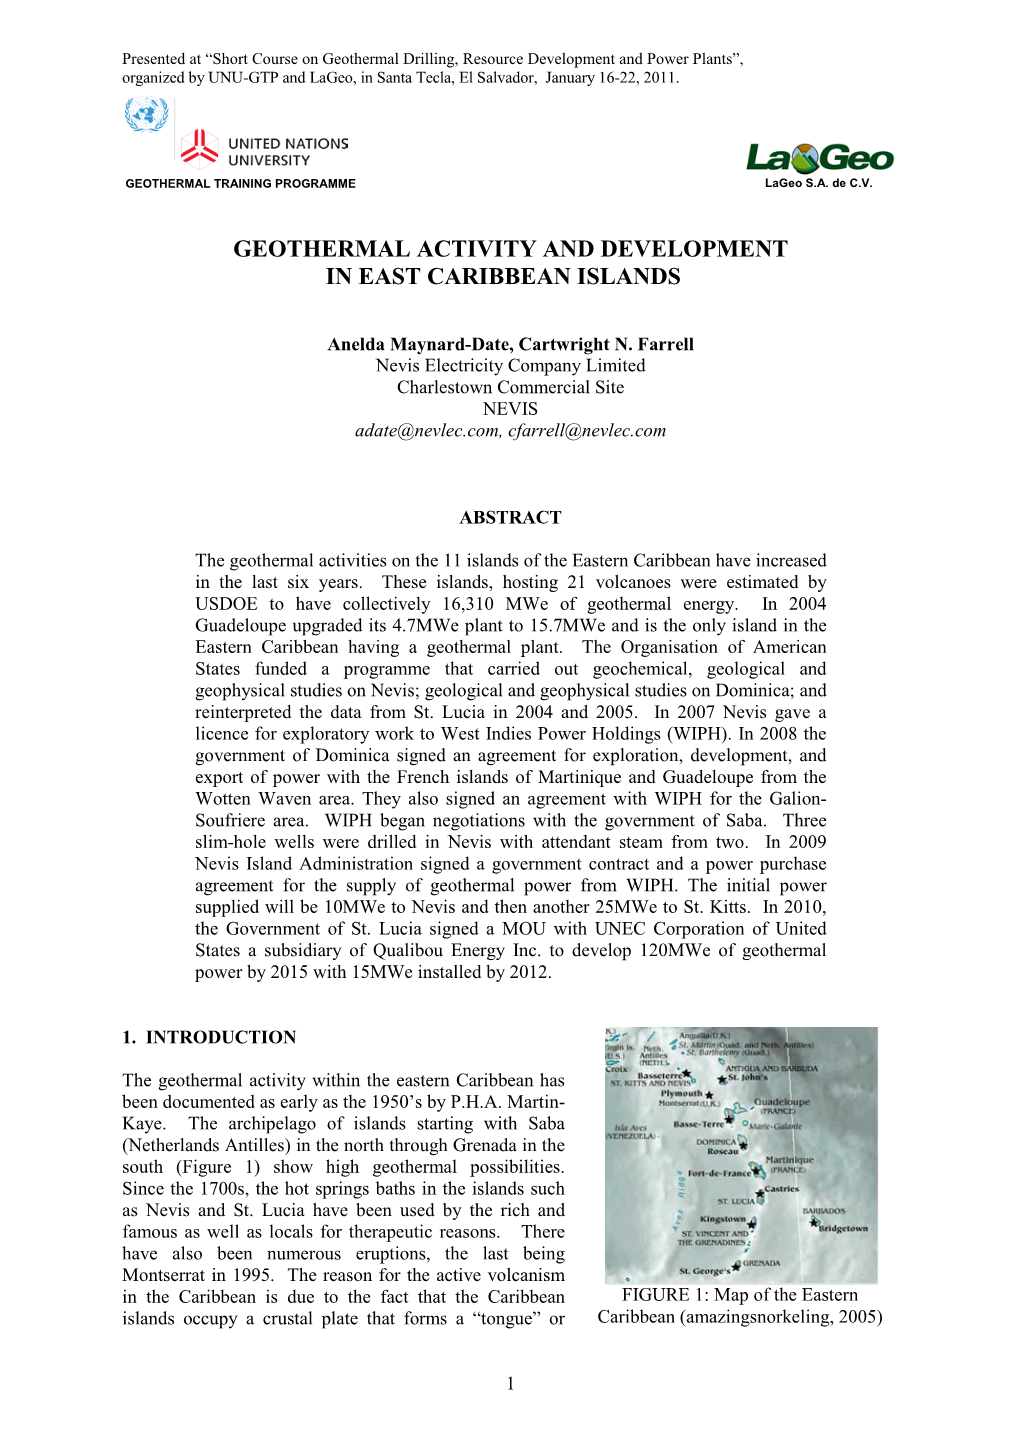 Geothermal Activity and Development in East Caribbean Islands